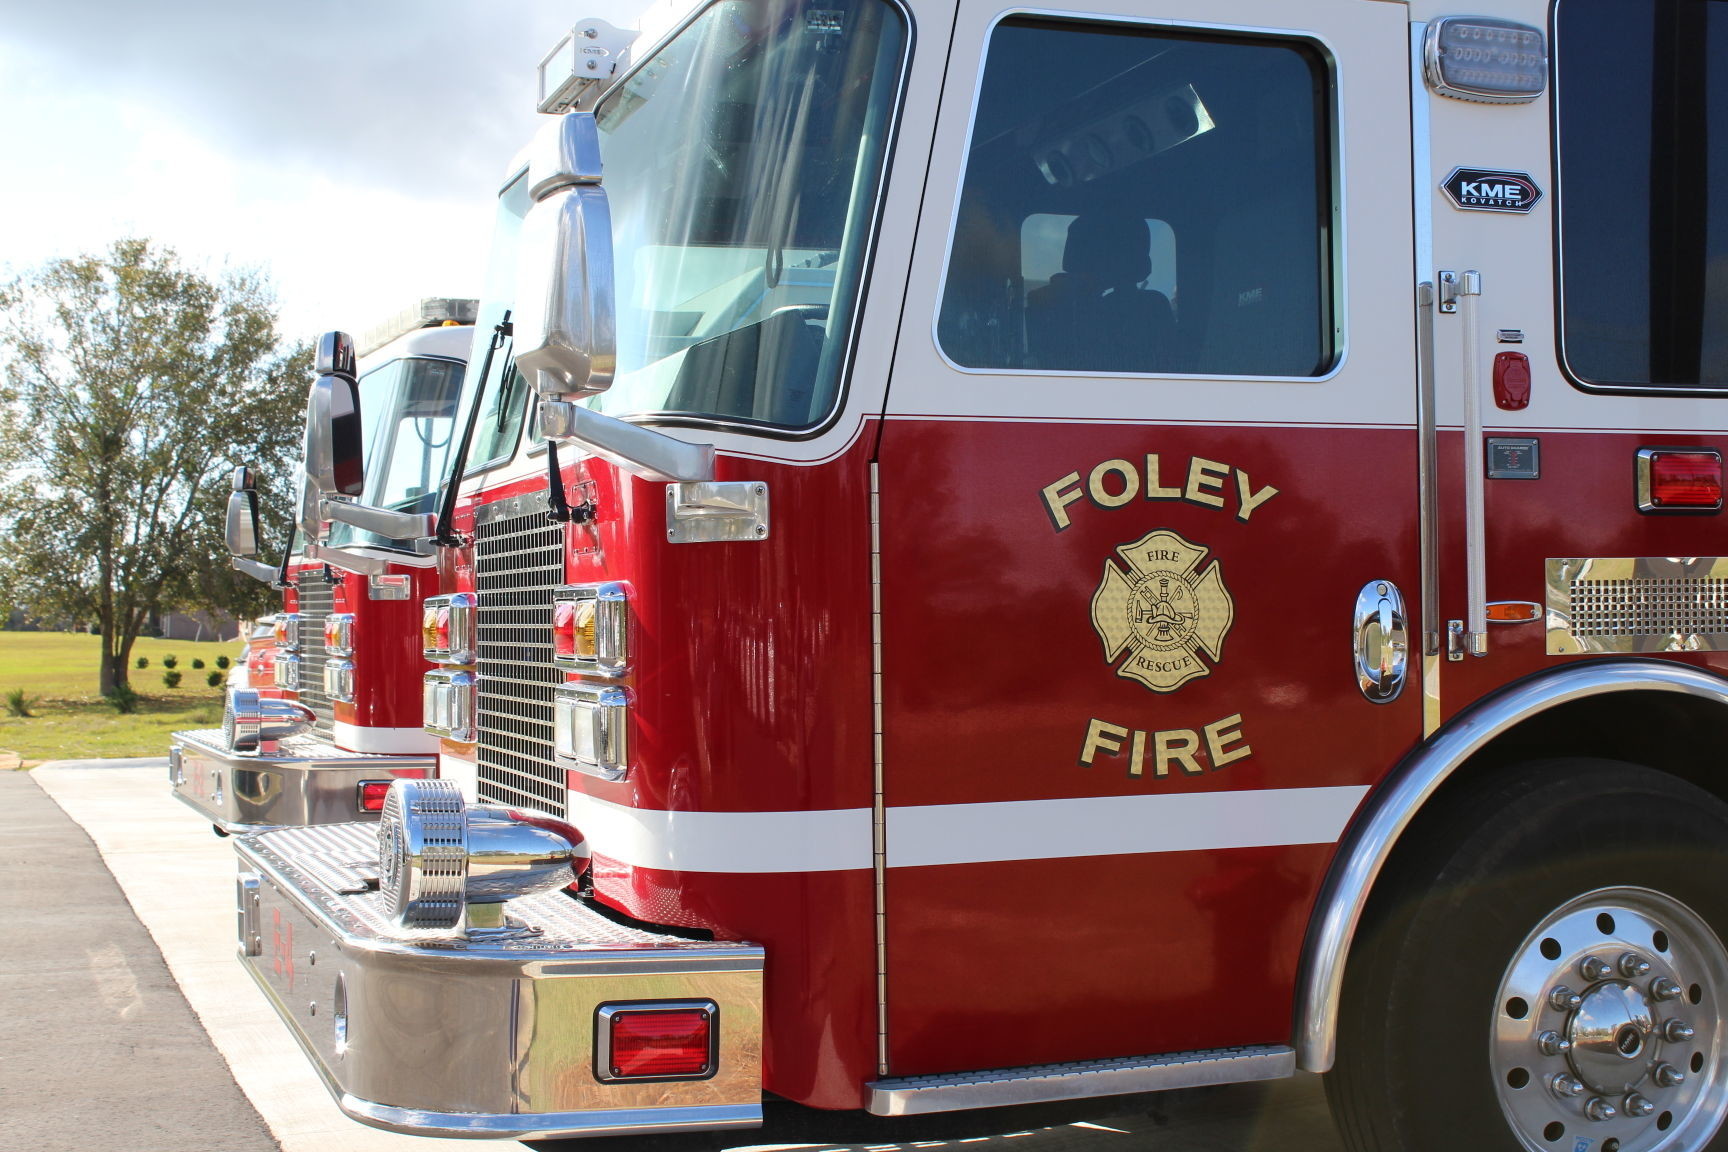 The Foley Fire Department is one of more than a dozen public safety entities that will be on-site to interact with guests from 4-8pm on August 25, 2018.